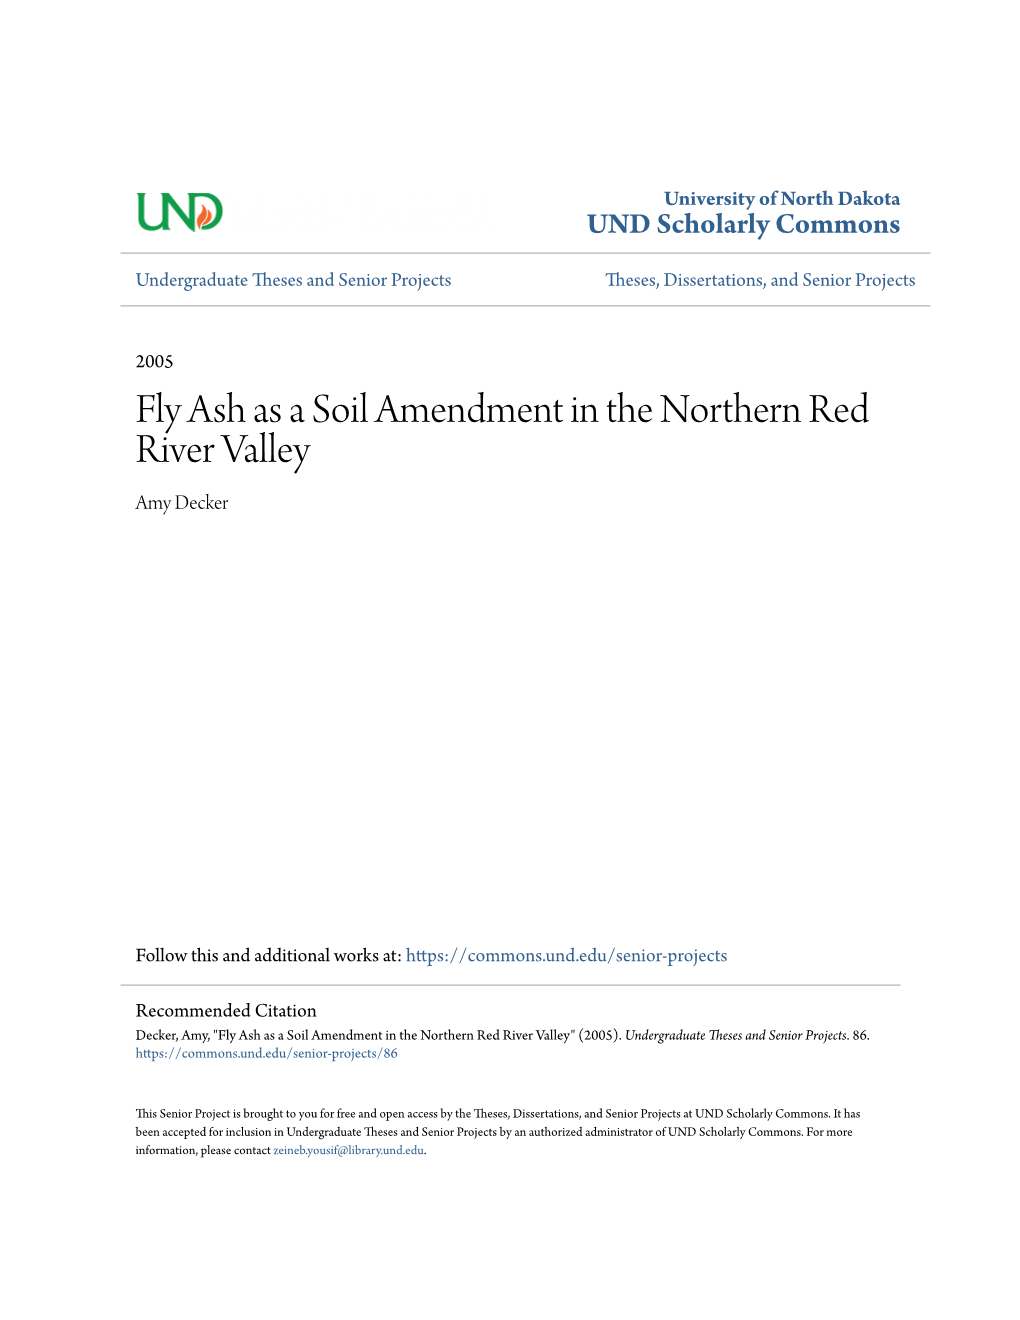 Fly Ash As a Soil Amendment in the Northern Red River Valley Amy Decker